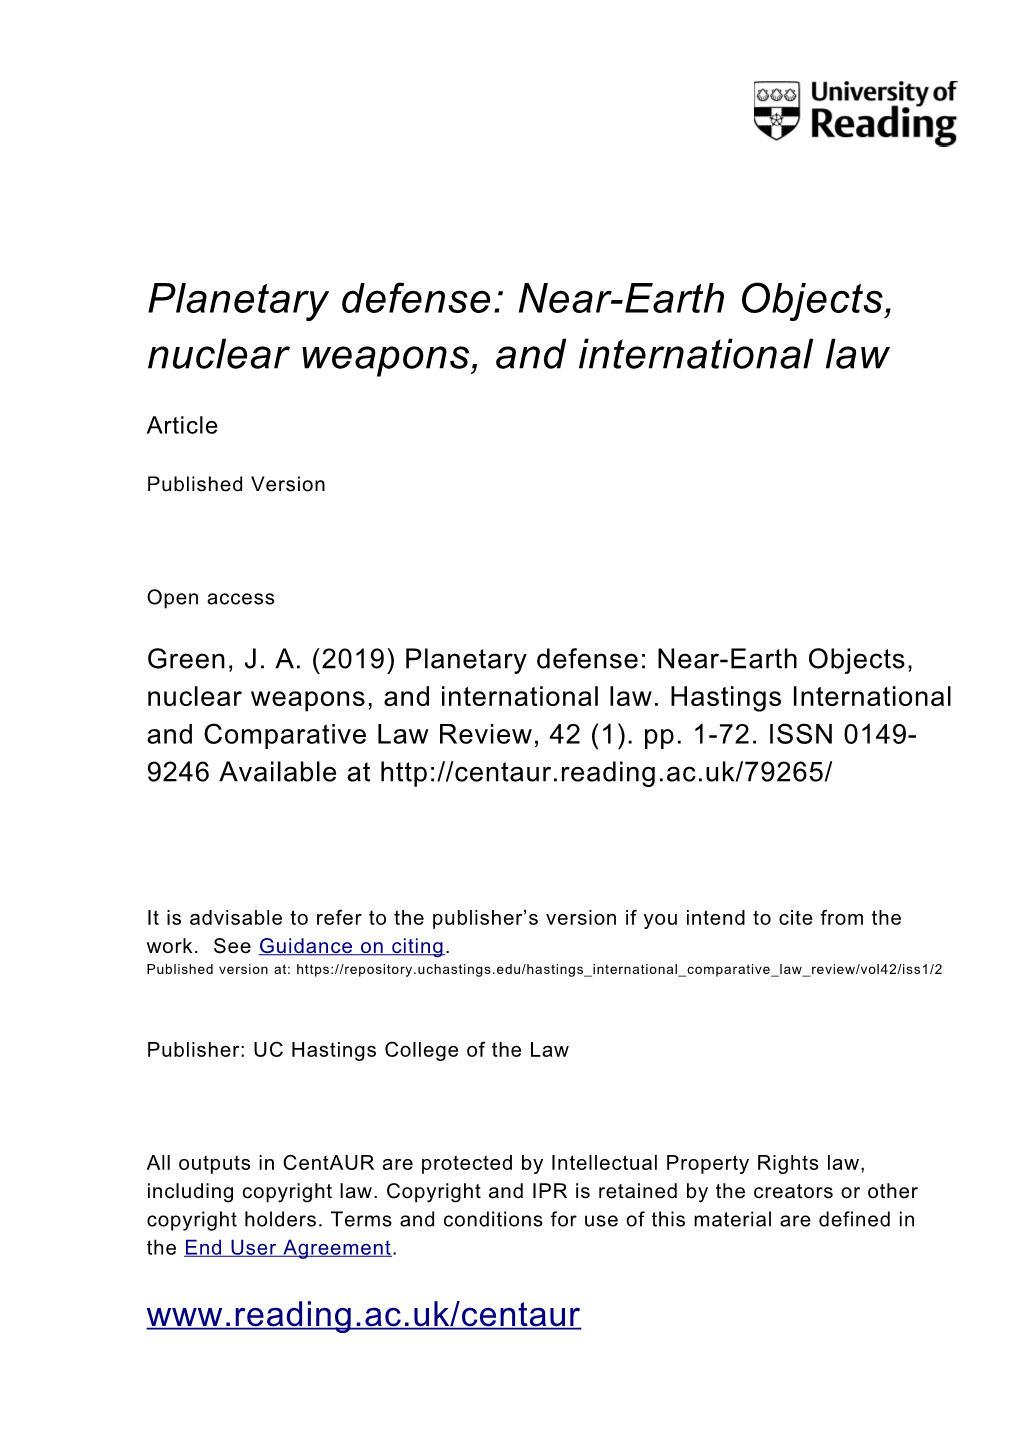 Near-Earth Objects, Nuclear Weapons, and International Law